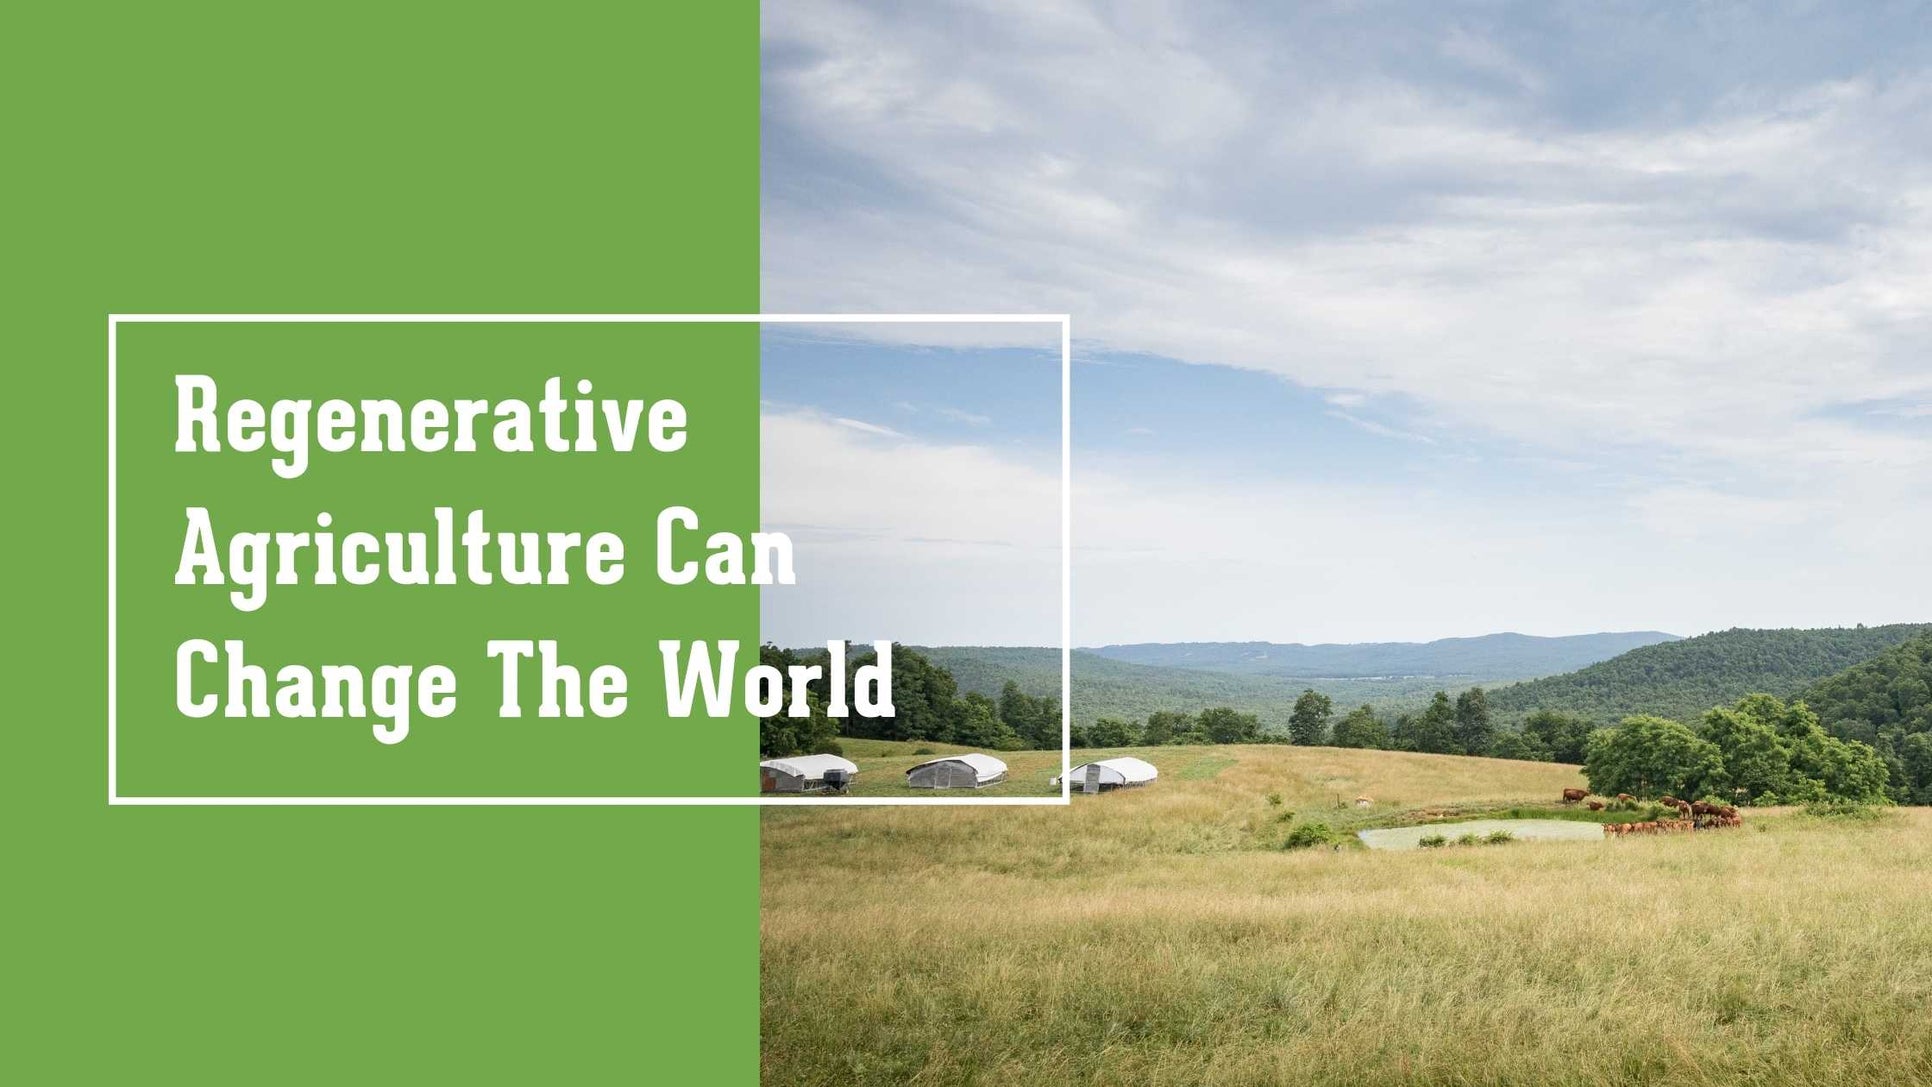 Regenerative Agriculture Can Change The World